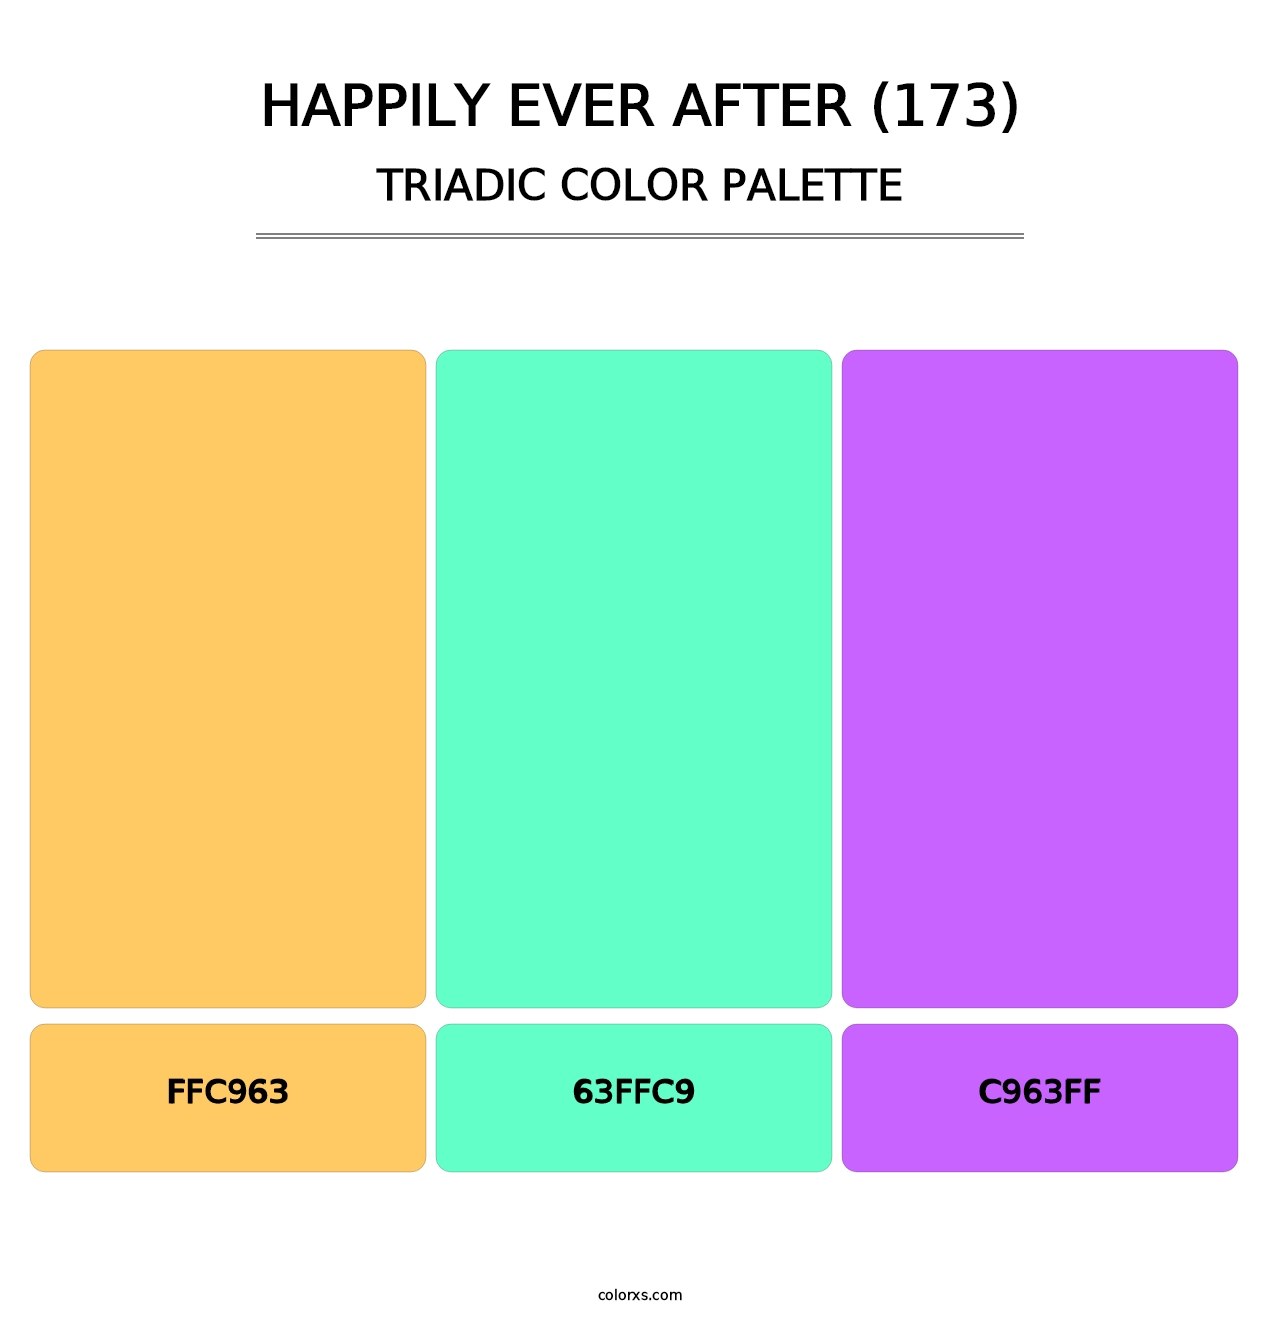 Happily Ever After (173) - Triadic Color Palette